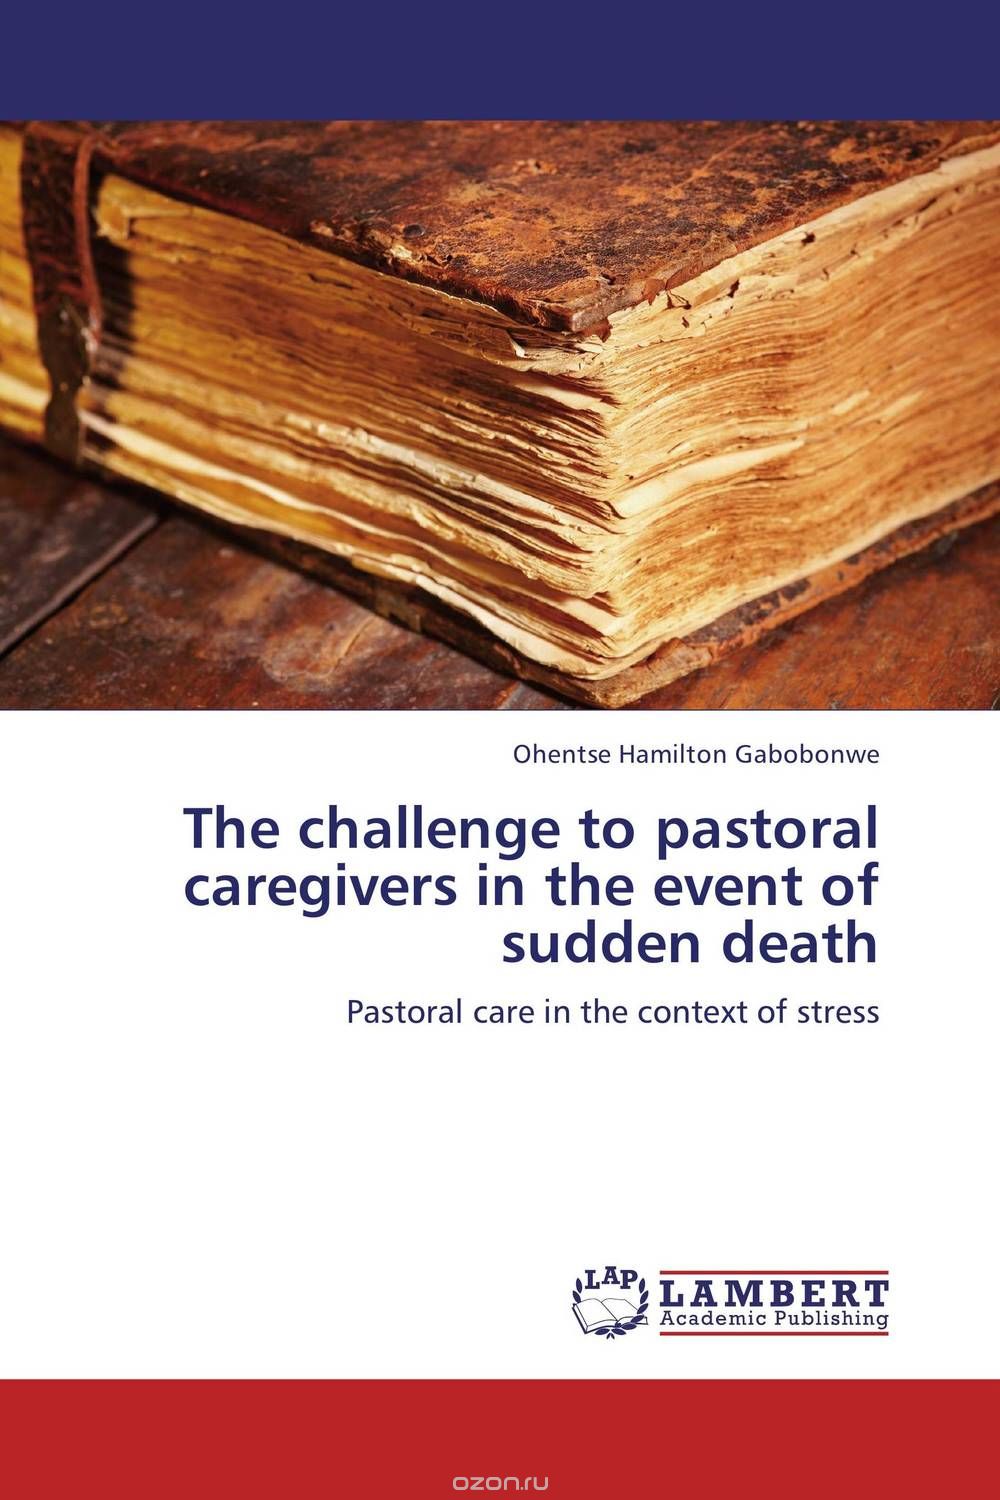 The challenge to pastoral caregivers in the event of sudden death